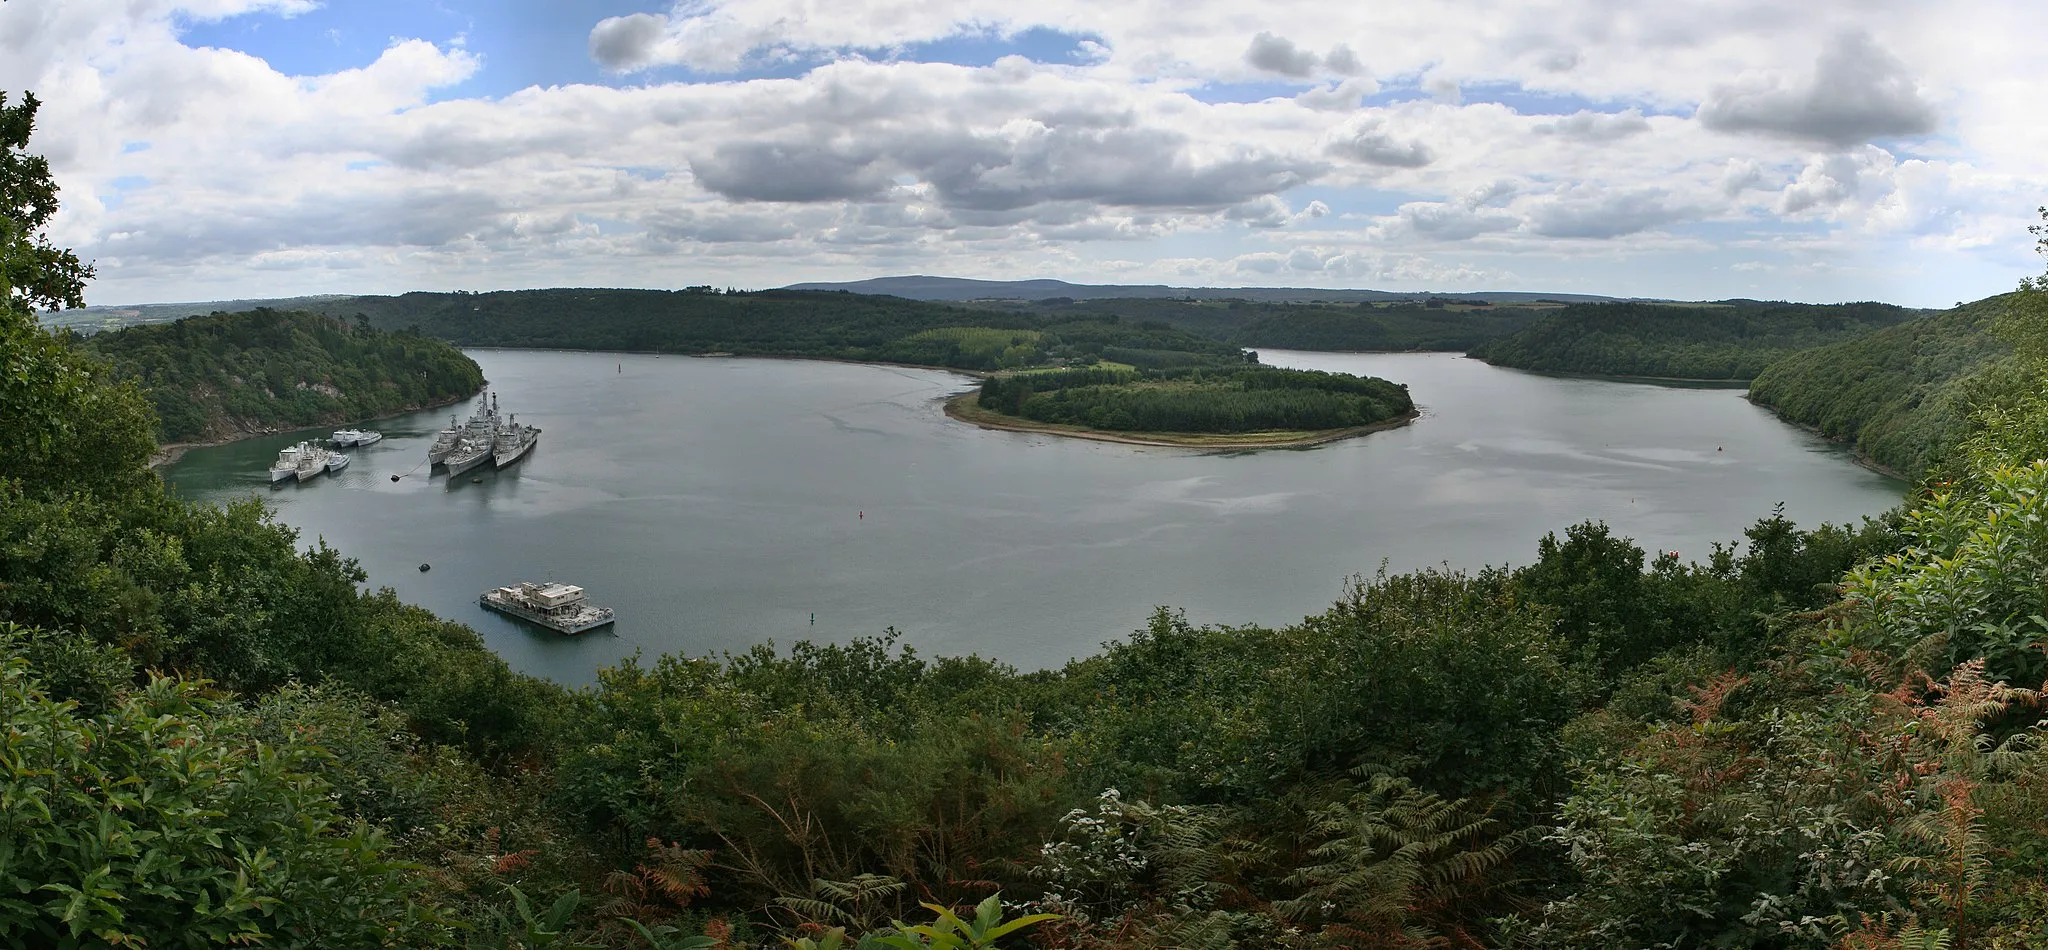 Photo showing: Panorama over the Aulne river, as seen from the Belle Vue belvedere, in Landévennec, Finistère département, Brittany, France. In the center of the picture, Térénez island is visible. On the left, the French navy ship cemetery.